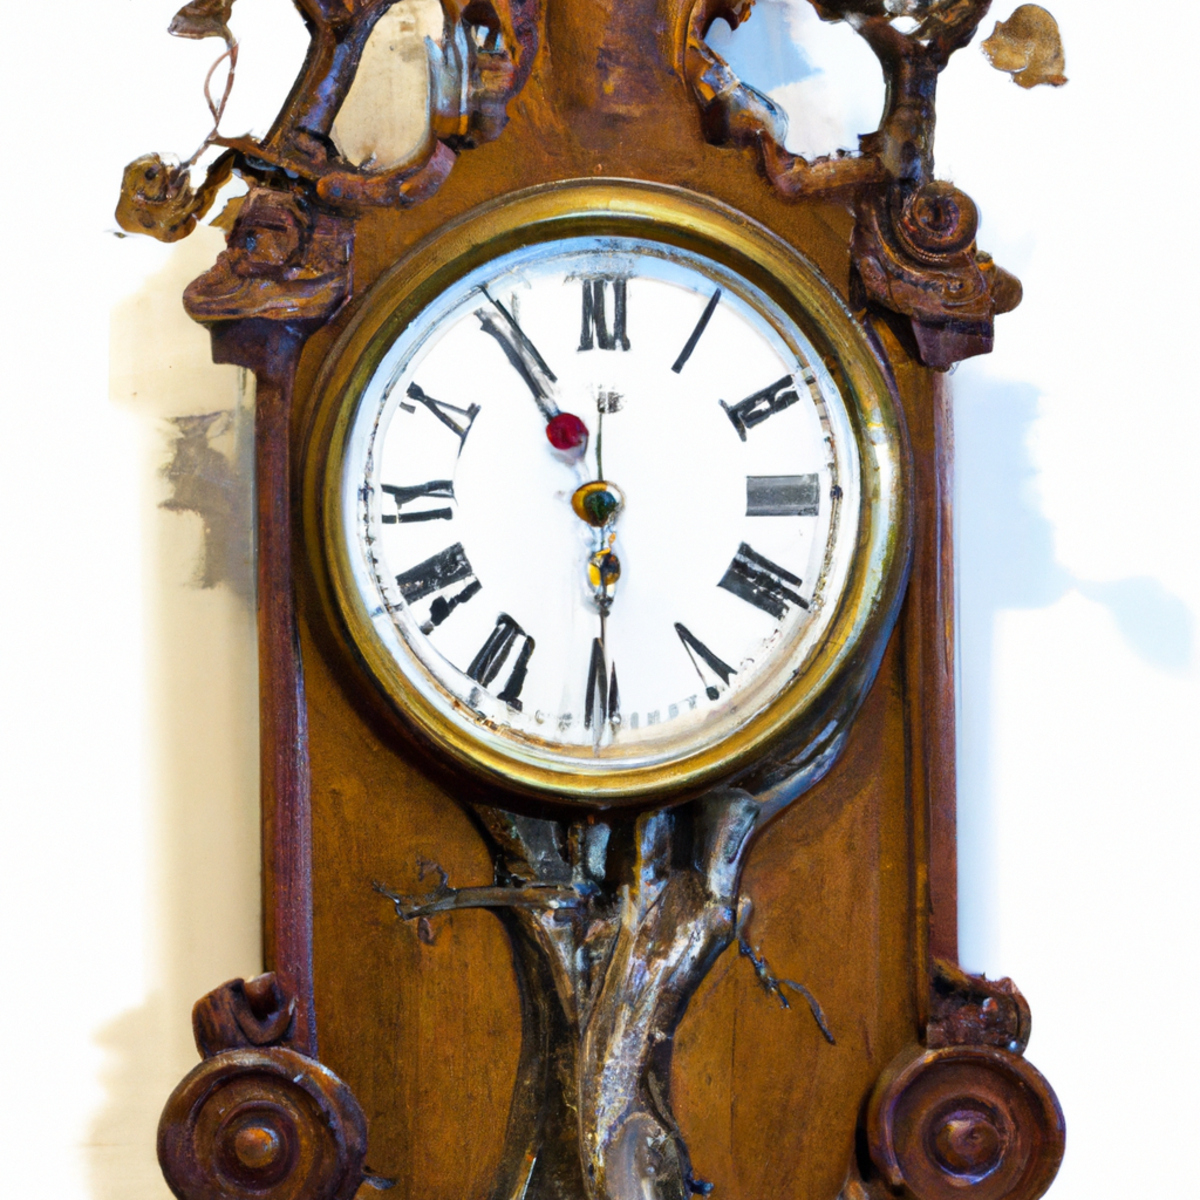 Antique clock frozen at twelve, symbolizing relentless aging. Aged mantelpiece echoes strength of those with Progeria.